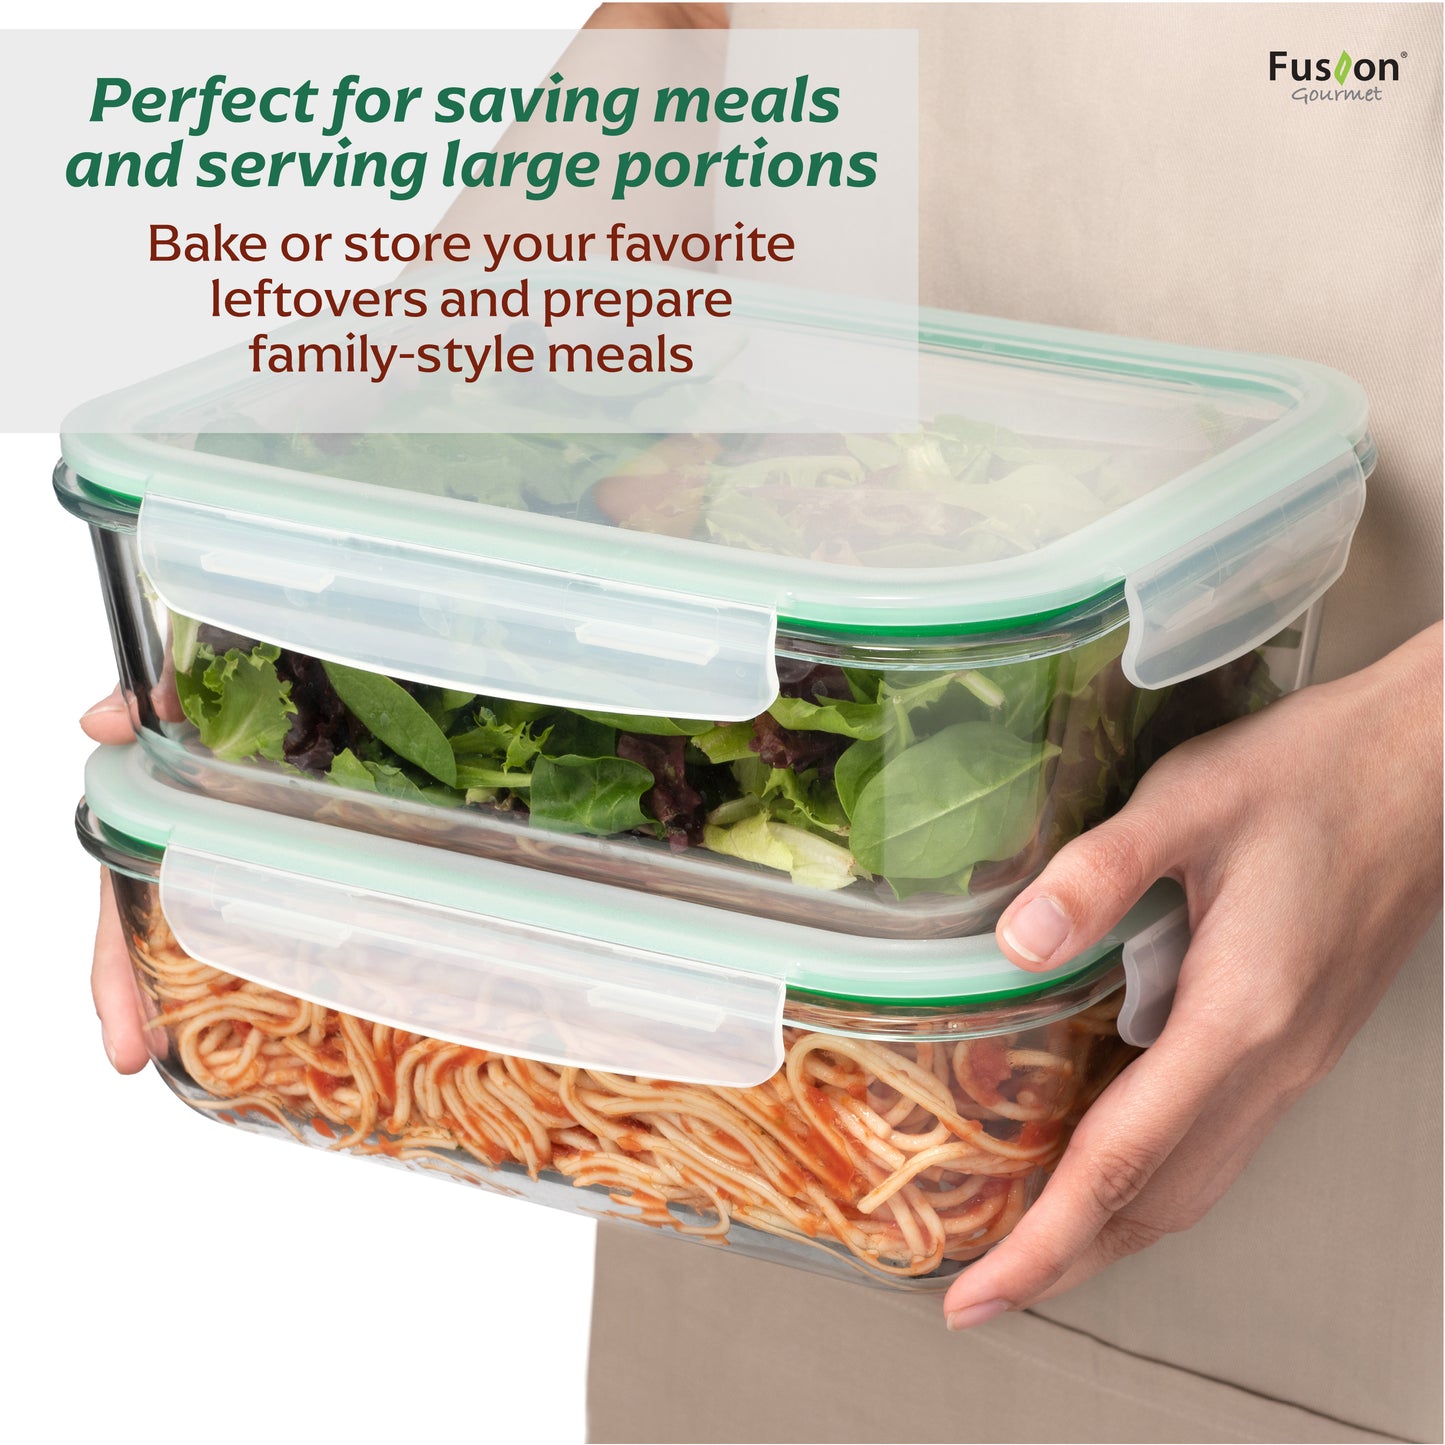 10pc Glass Food Storage Containers With Lids (5 Lids & 5 Containers), Glass  Meal Prep Container For Lunch, Airtight Pantry Organizers And Storage, Glass  Lunch Boxes For Freezer To Oven Safe